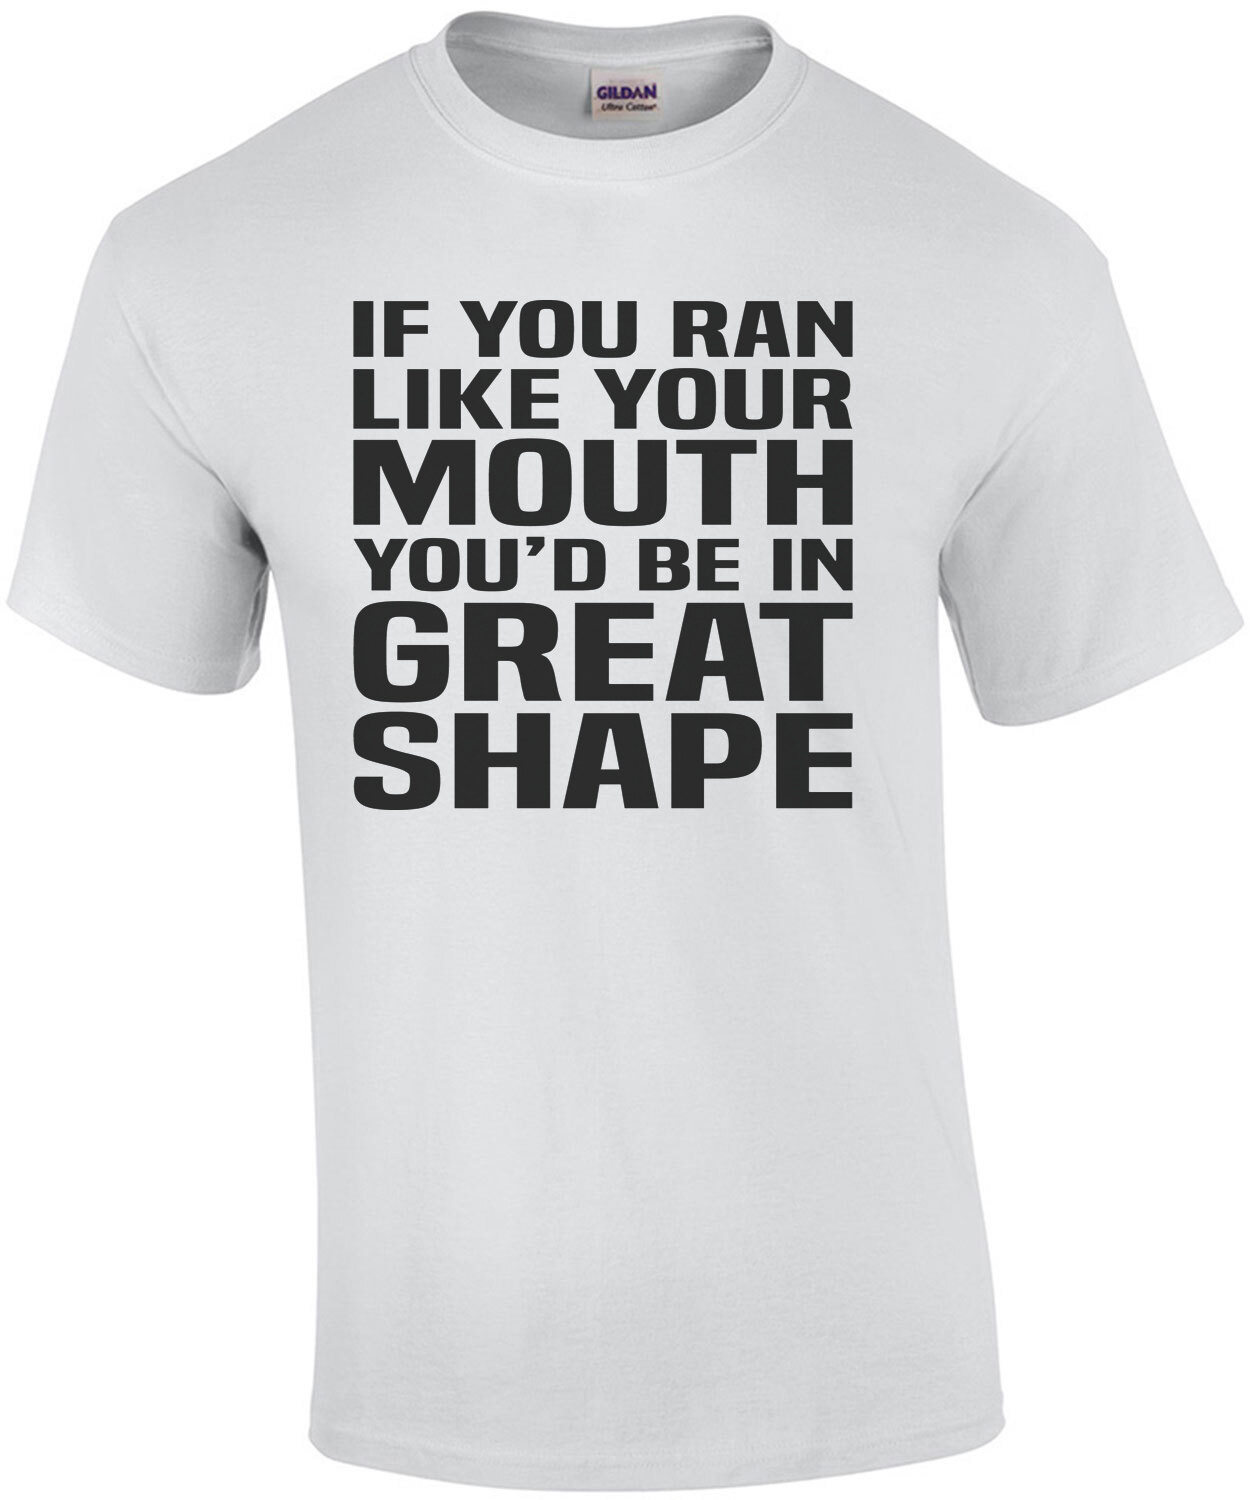 If you ran like your mouth you'd be in great shape - funny sarcastic t-shirt